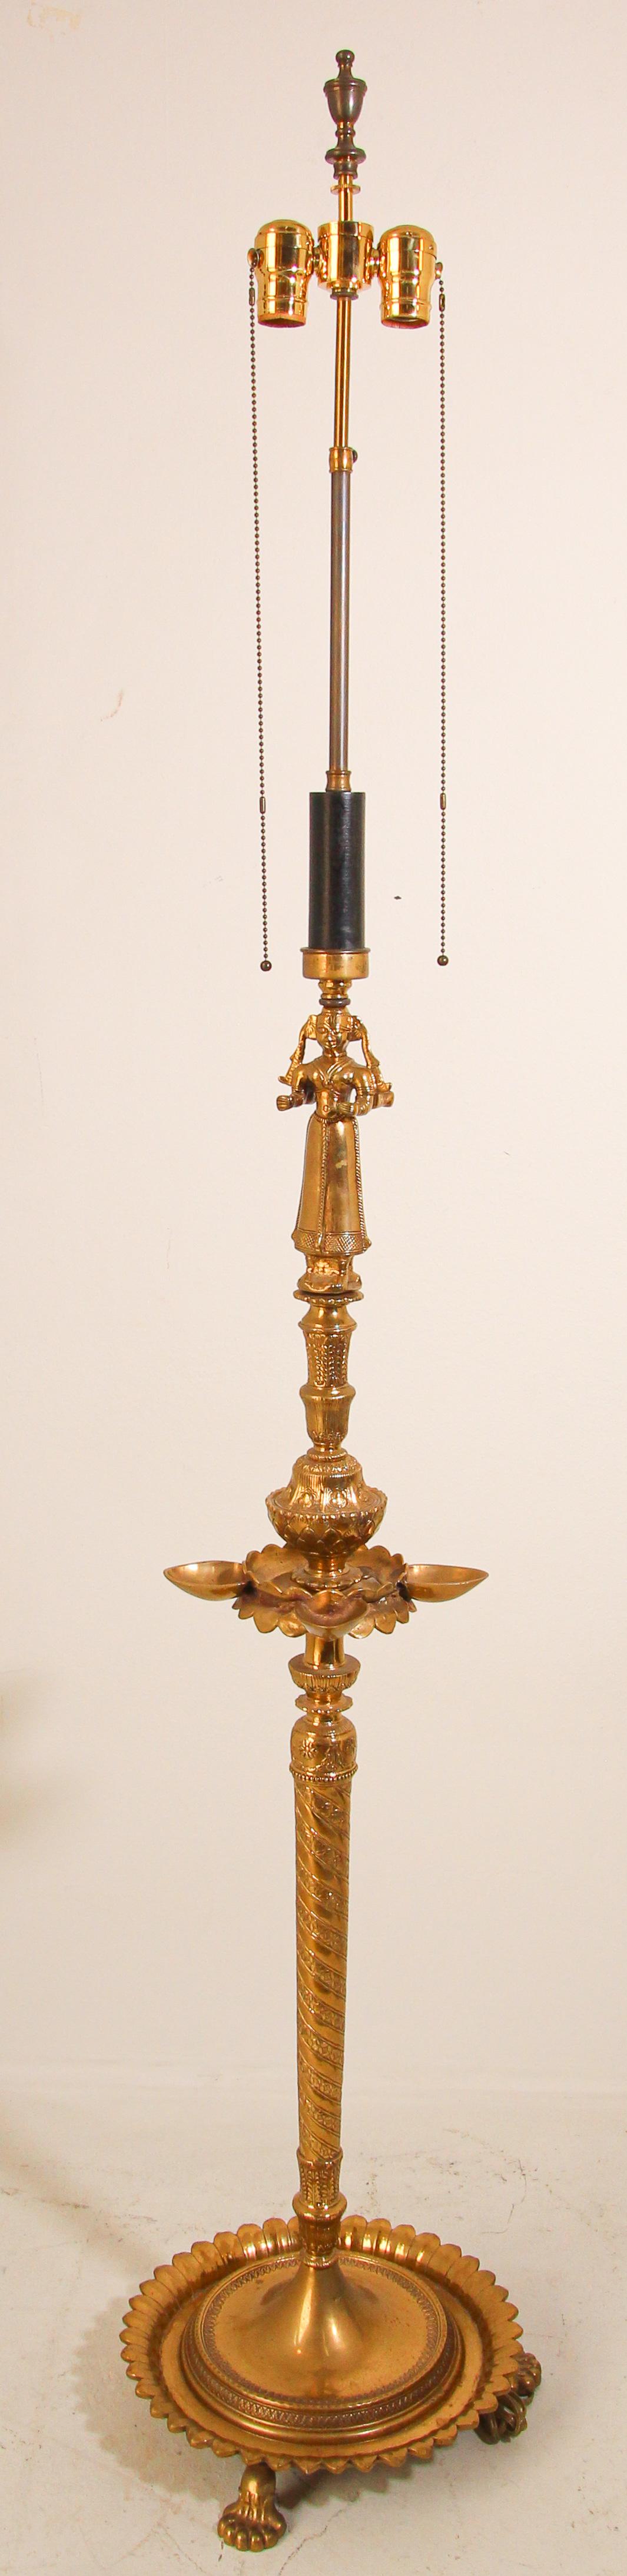 Mughal Raj Hindu Indian Brass Temple Oil Lamp turned into a floor lamp.
Rewired in the US.
Polished brass handcrafted in India.
Brass oil lamp to top brass head is 41